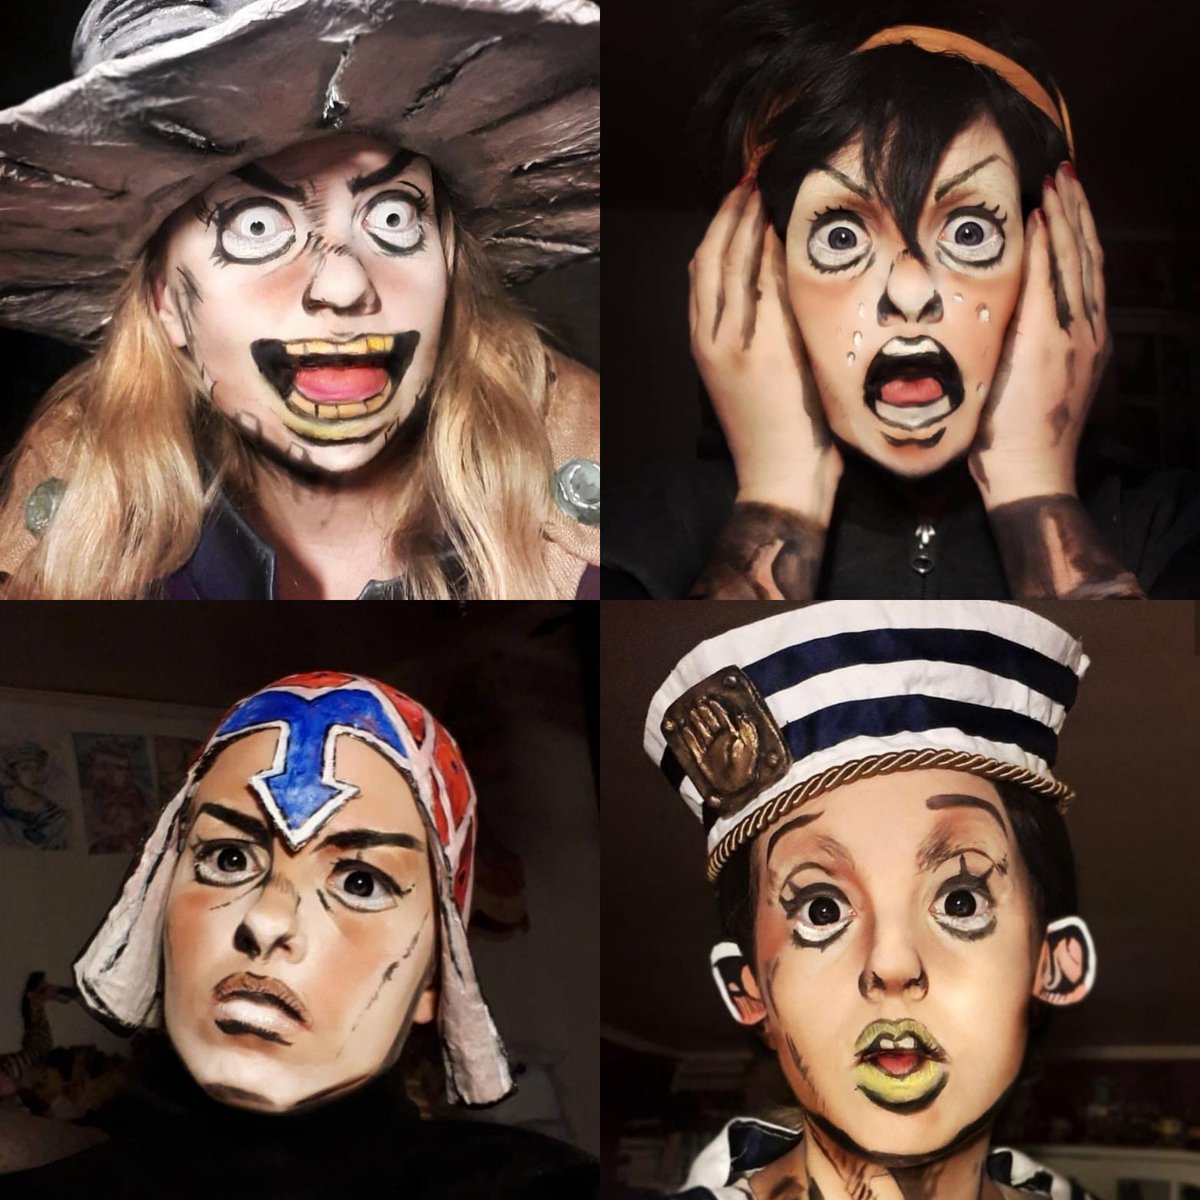 YellowCake on Twitter: "YellowCake Cosplay @YellowCakeCos I Jojo's Bizarre Adventure and I also love painting all the silly faces I find in the manga and my face by using